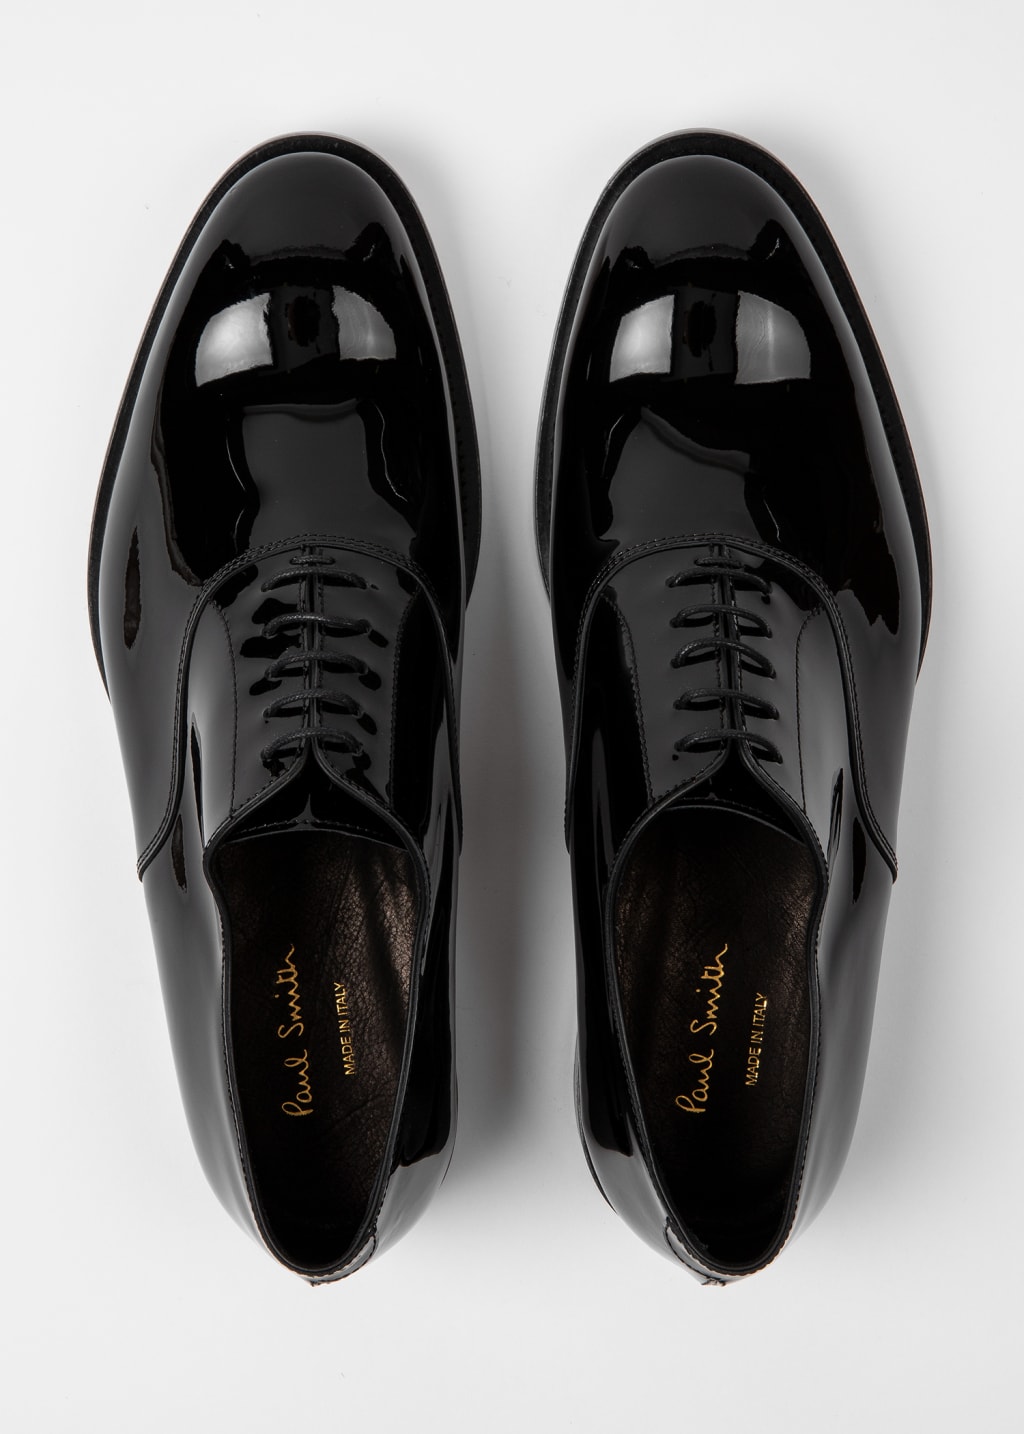 Black Patent Leather 'Gershwin' Oxford Shoes overhead